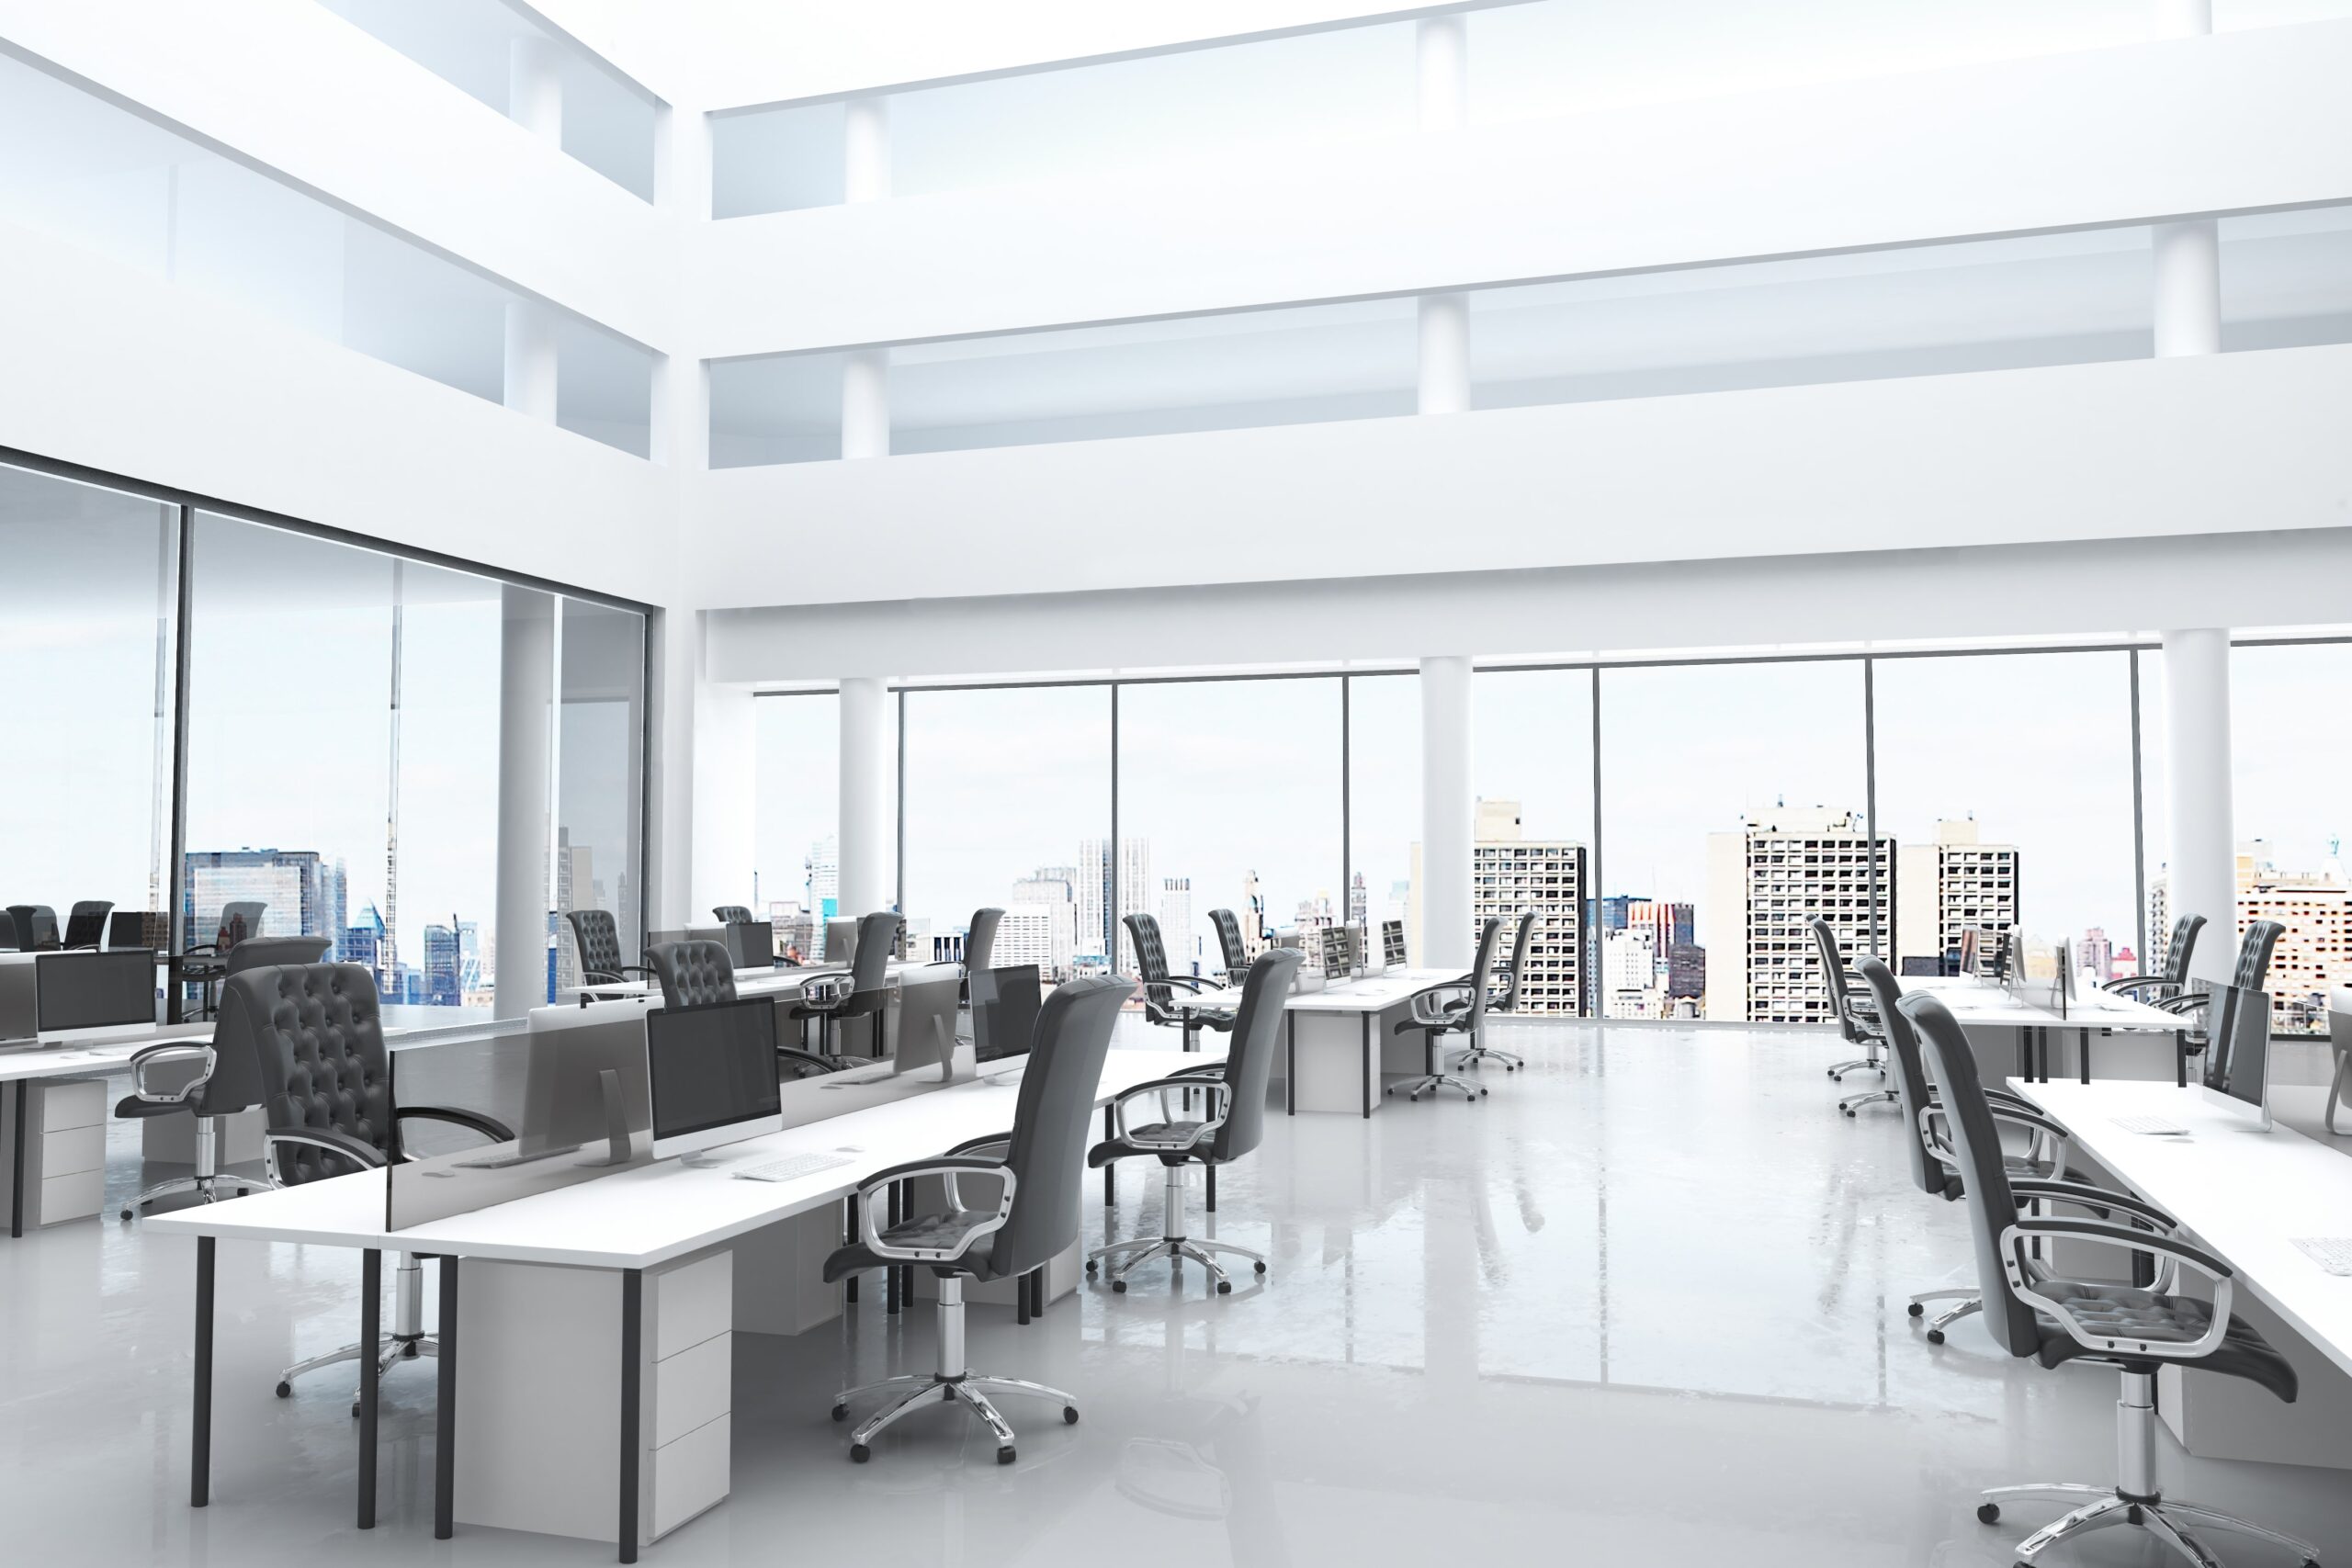 Why Should You Switch To Modular Office Furniture At Your Workplace?